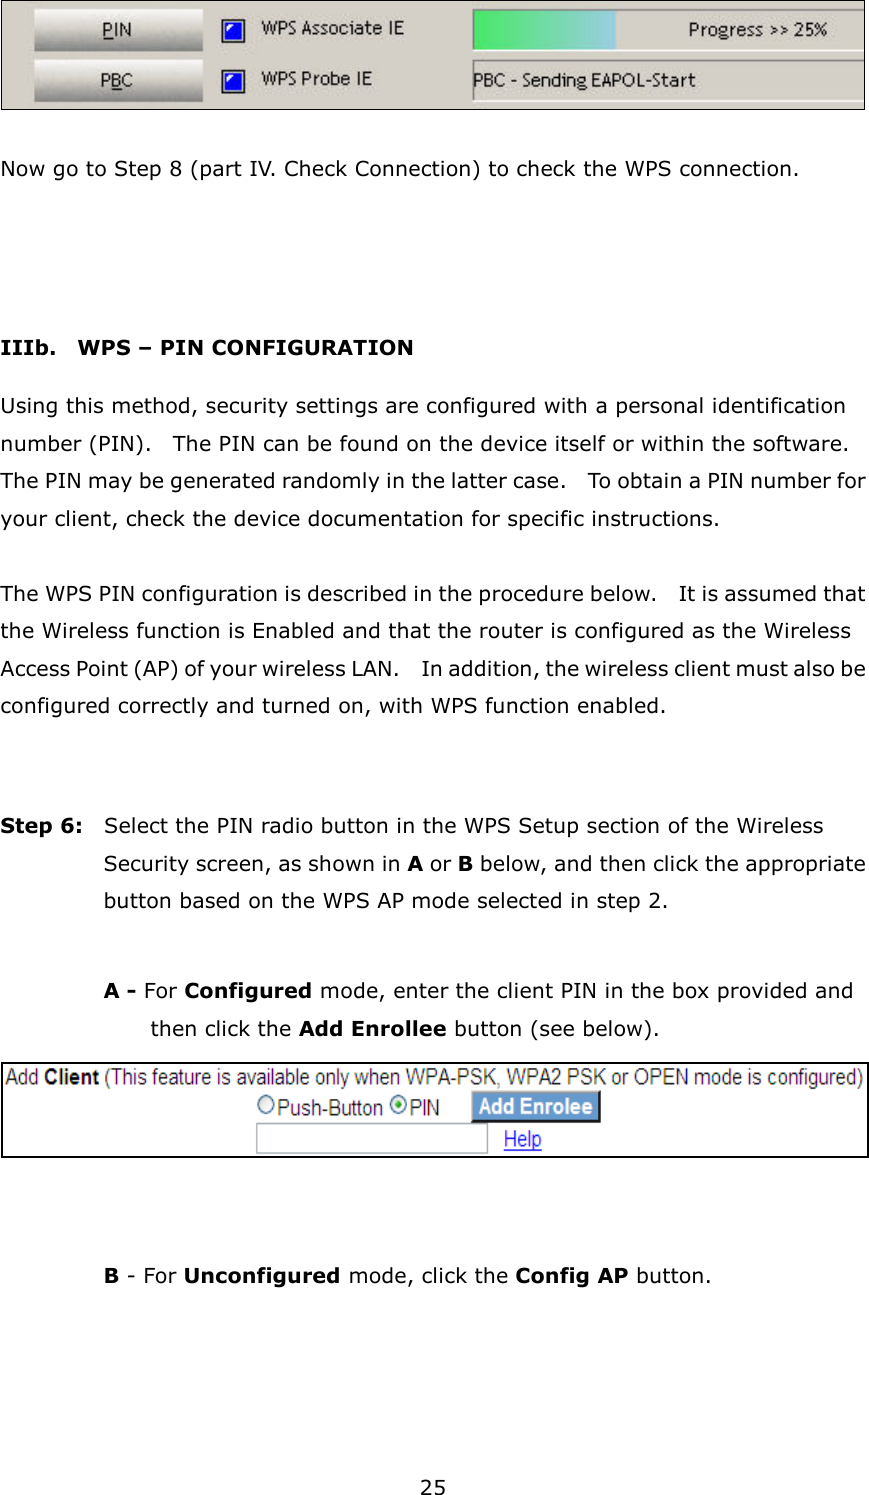 25   Now go to Step 8 (part IV. Check Connection) to check the WPS connection.   IIIb.    WPS – PIN CONFIGURATION Using this method, security settings are configured with a personal identification number (PIN).    The PIN can be found on the device itself or within the software.   The PIN may be generated randomly in the latter case.    To obtain a PIN number for your client, check the device documentation for specific instructions.  The WPS PIN configuration is described in the procedure below.    It is assumed that the Wireless function is Enabled and that the router is configured as the Wireless Access Point (AP) of your wireless LAN.    In addition, the wireless client must also be configured correctly and turned on, with WPS function enabled.   Step 6:    Select the PIN radio button in the WPS Setup section of the Wireless Security screen, as shown in A or B below, and then click the appropriate button based on the WPS AP mode selected in step 2.    A - For Configured mode, enter the client PIN in the box provided and   then click the Add Enrollee button (see below).      B - For Unconfigured mode, click the Config AP button.  